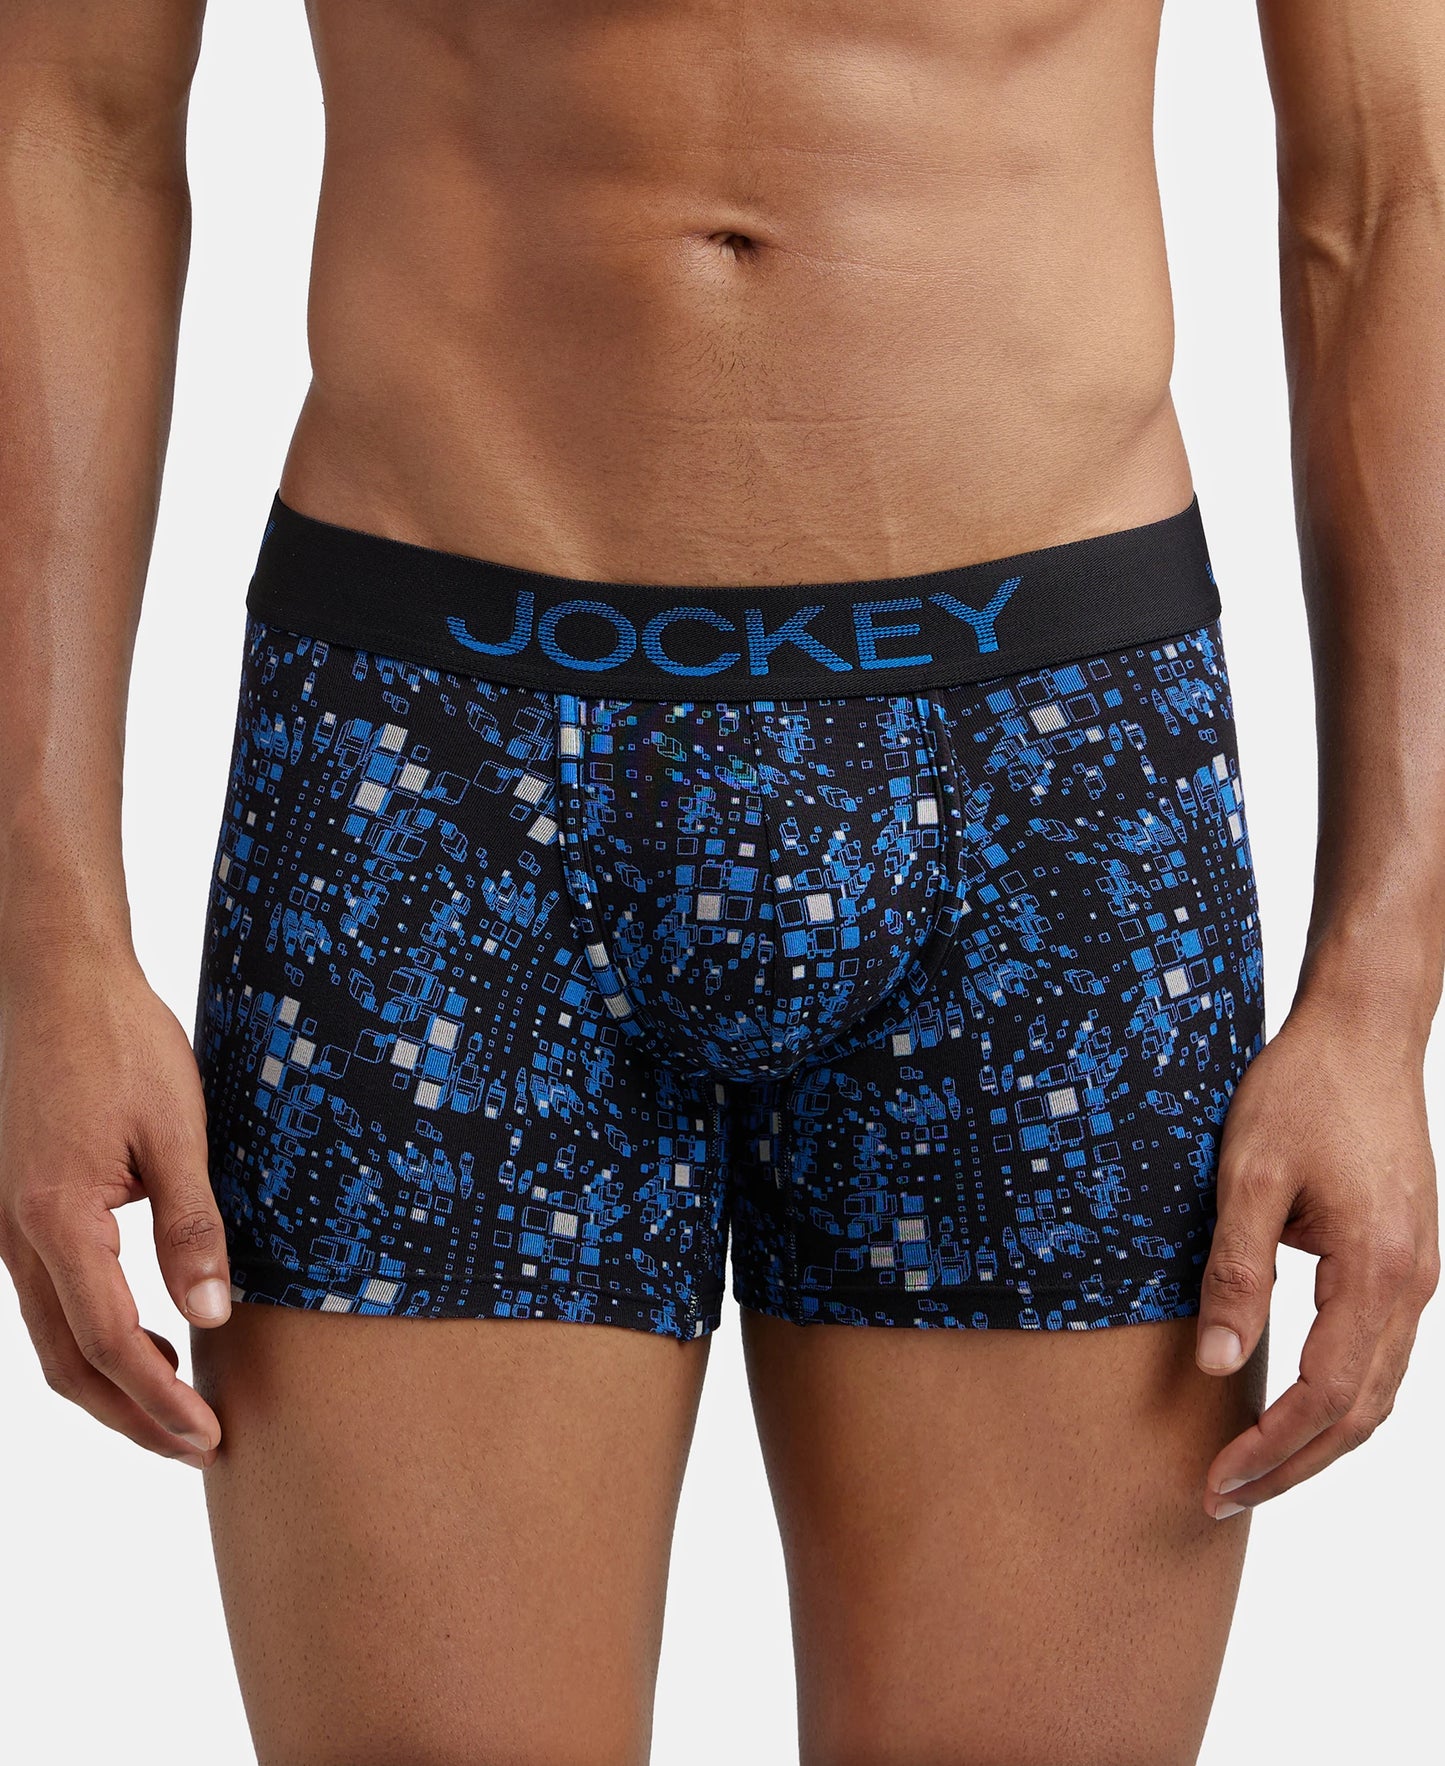 Super Combed Cotton Elastane Printed Trunk with Ultrasoft Waistband - Black & Sky Driver-1